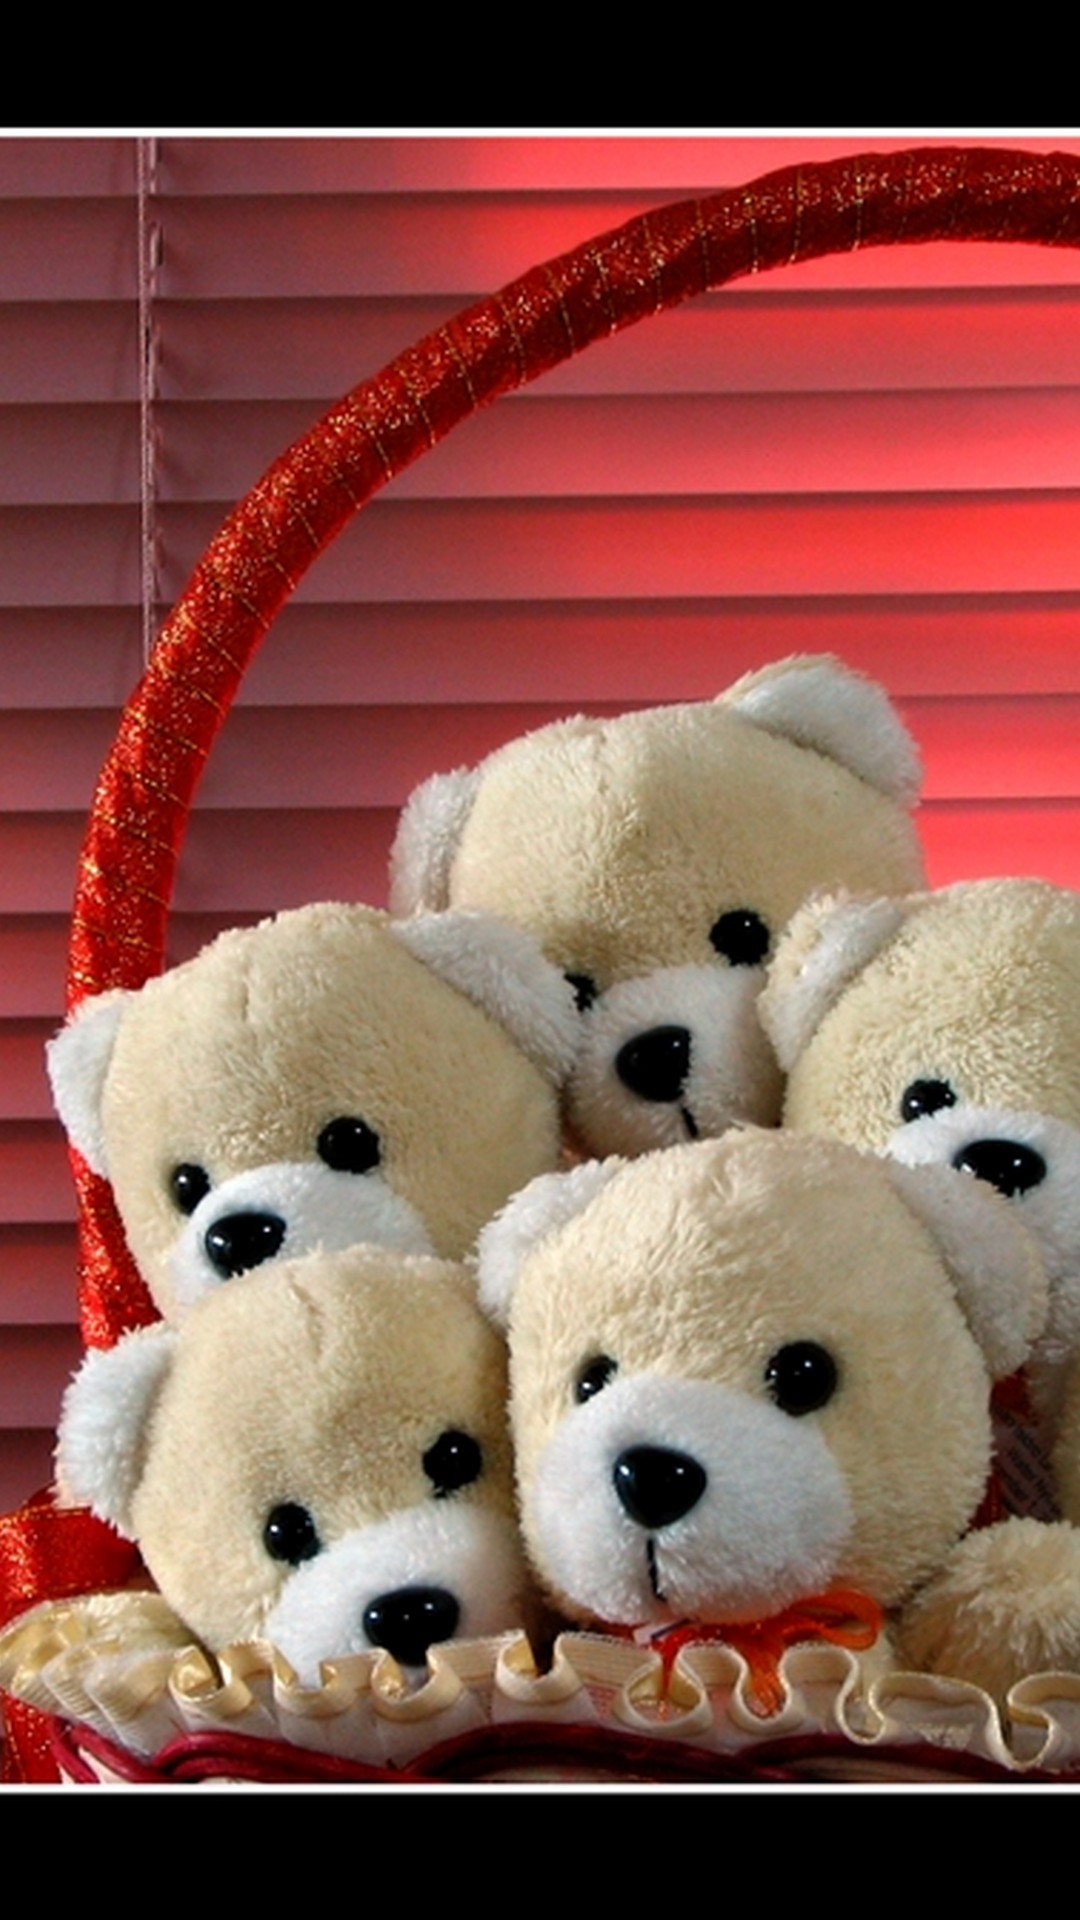 iPhone Wallpaper Cute Teddy Bear with resolution 1080X1920 pixel. You can make this wallpaper for your iPhone 5, 6, 7, 8, X backgrounds, Mobile Screensaver, or iPad Lock Screen